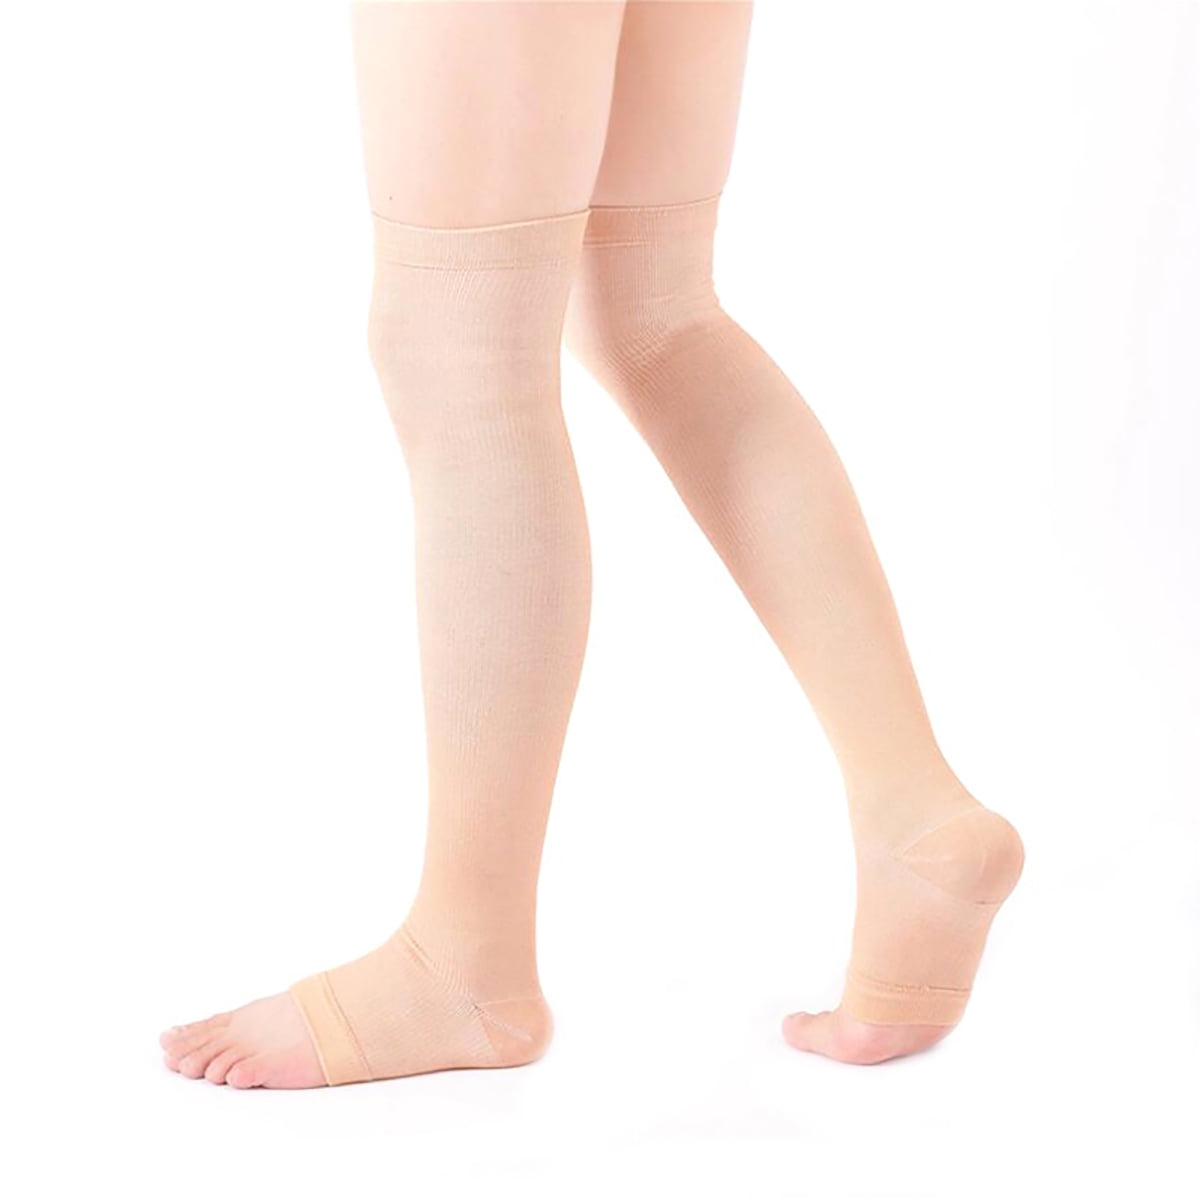 Varicose veins prevention, Compression tights, relief for tired